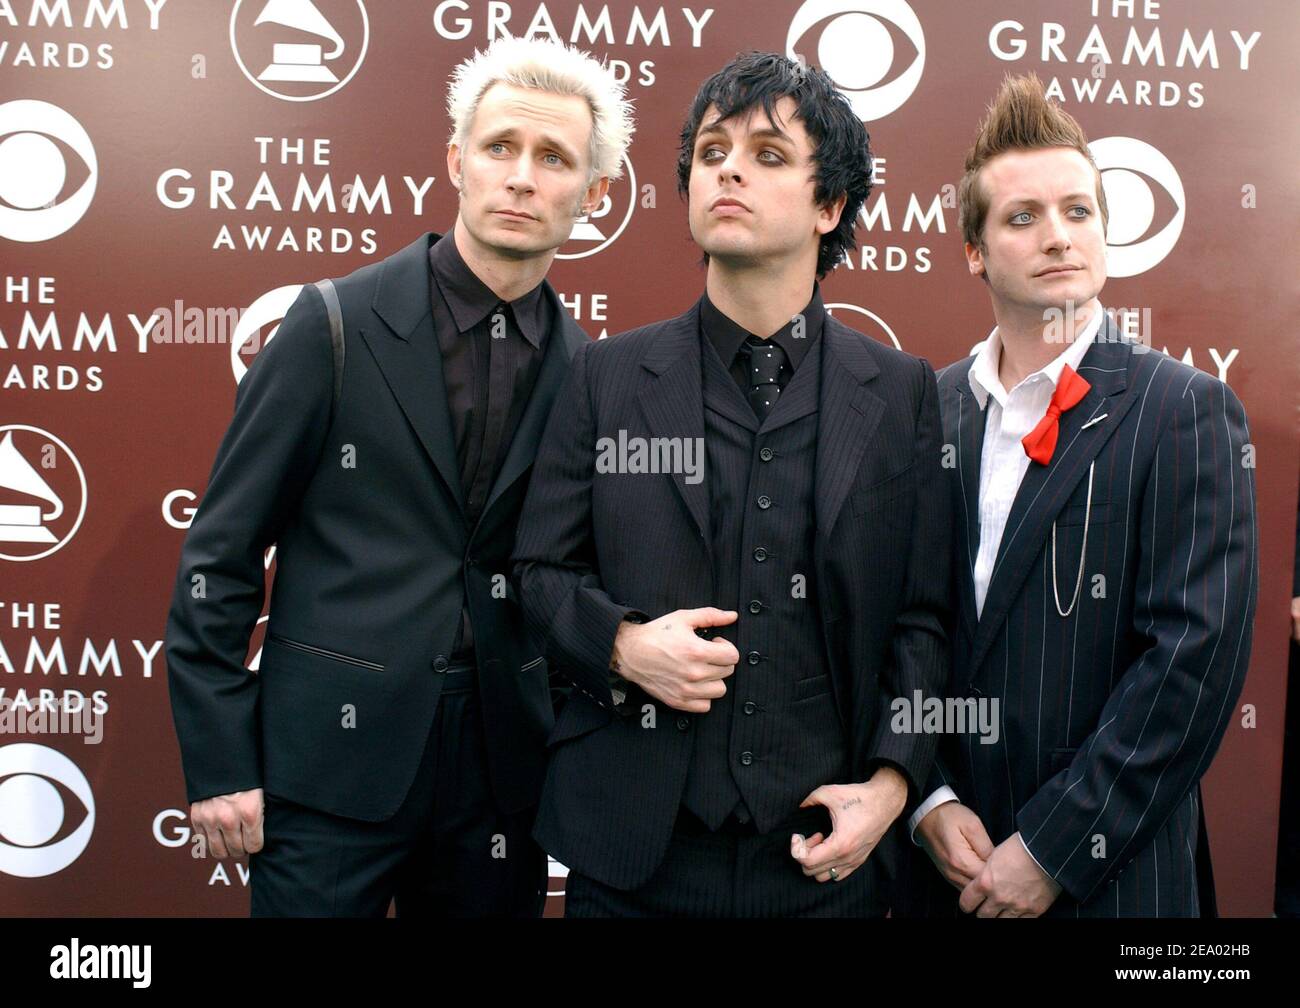 Music group Green Day attends the 47th Annual Grammy Awards in Los Angeles, CA on February 13, 2005. Photo by Hahn-Khayat/ABACA. Stock Photo